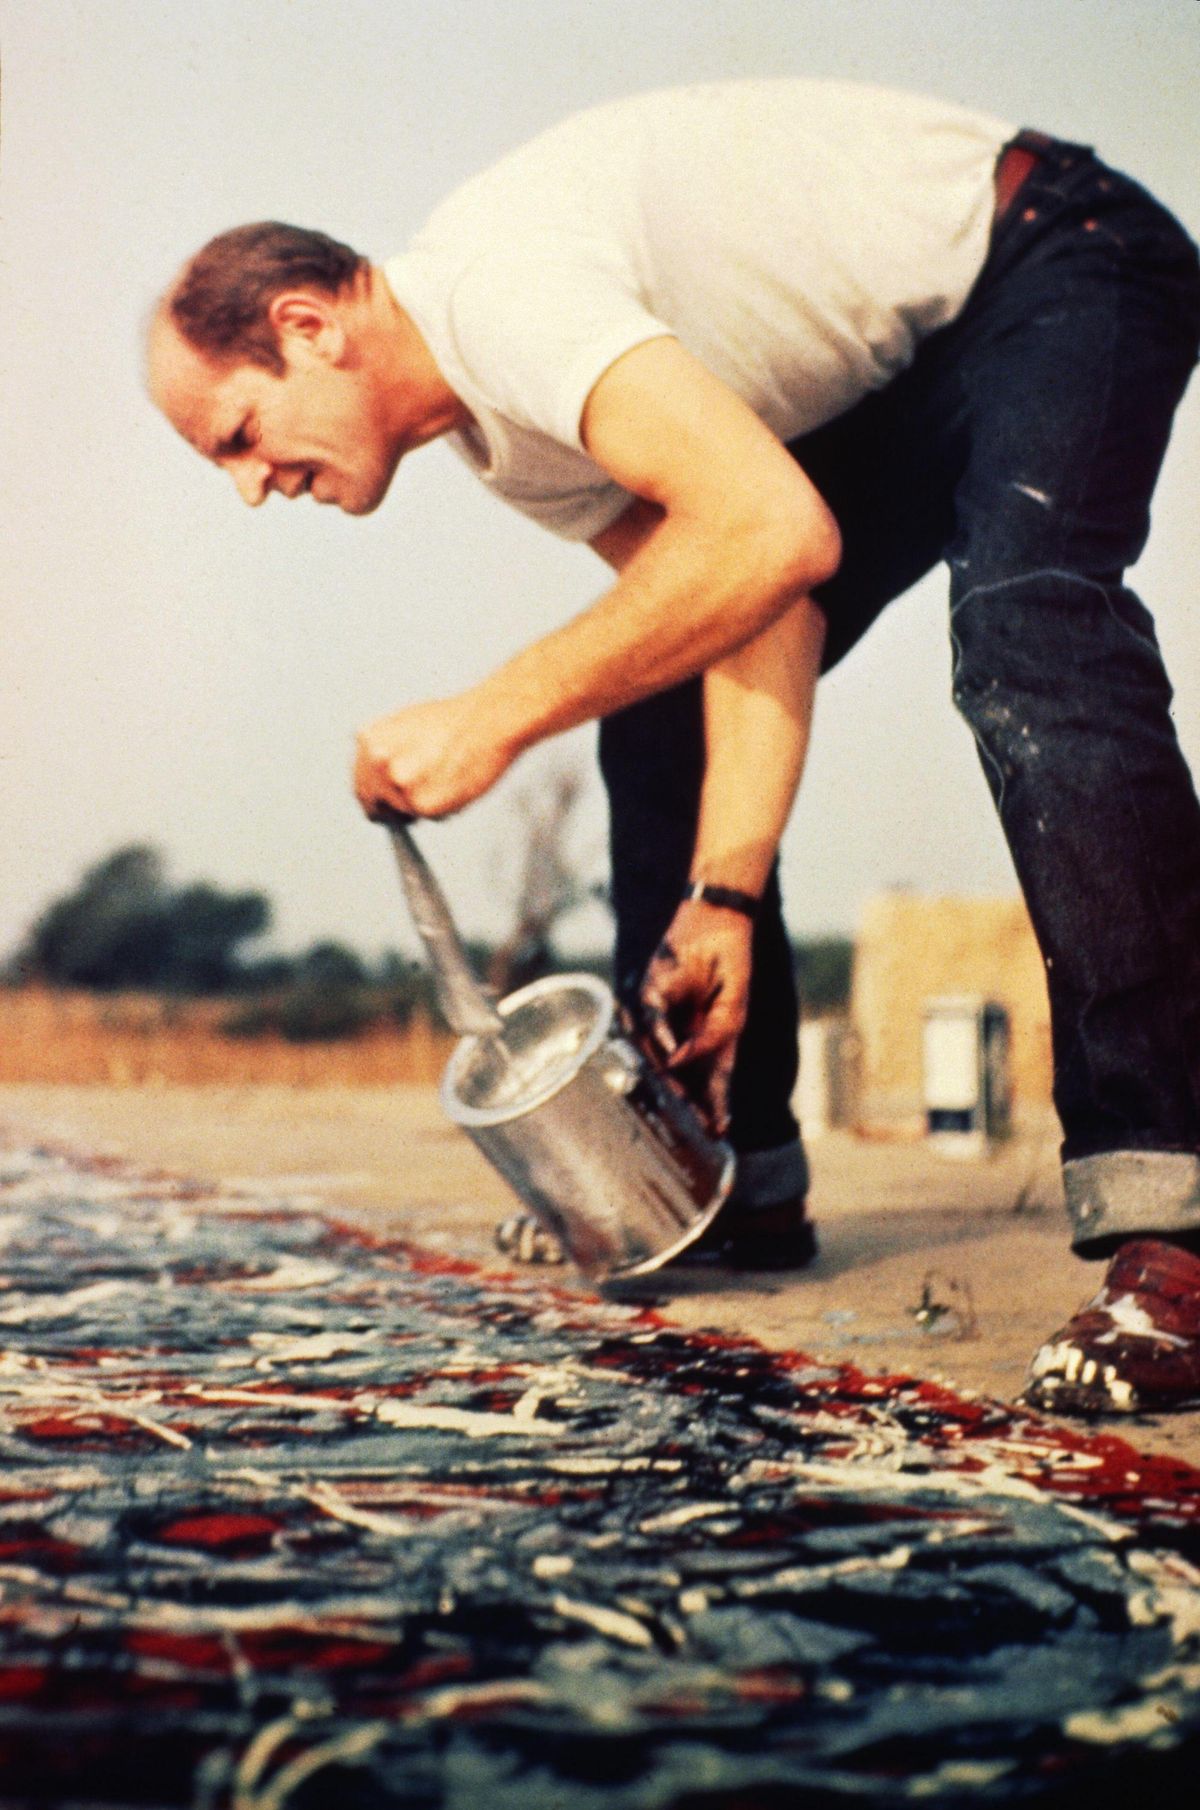 Jackson Pollock painting in 1950 Science History Images / Alamy Stock Photo